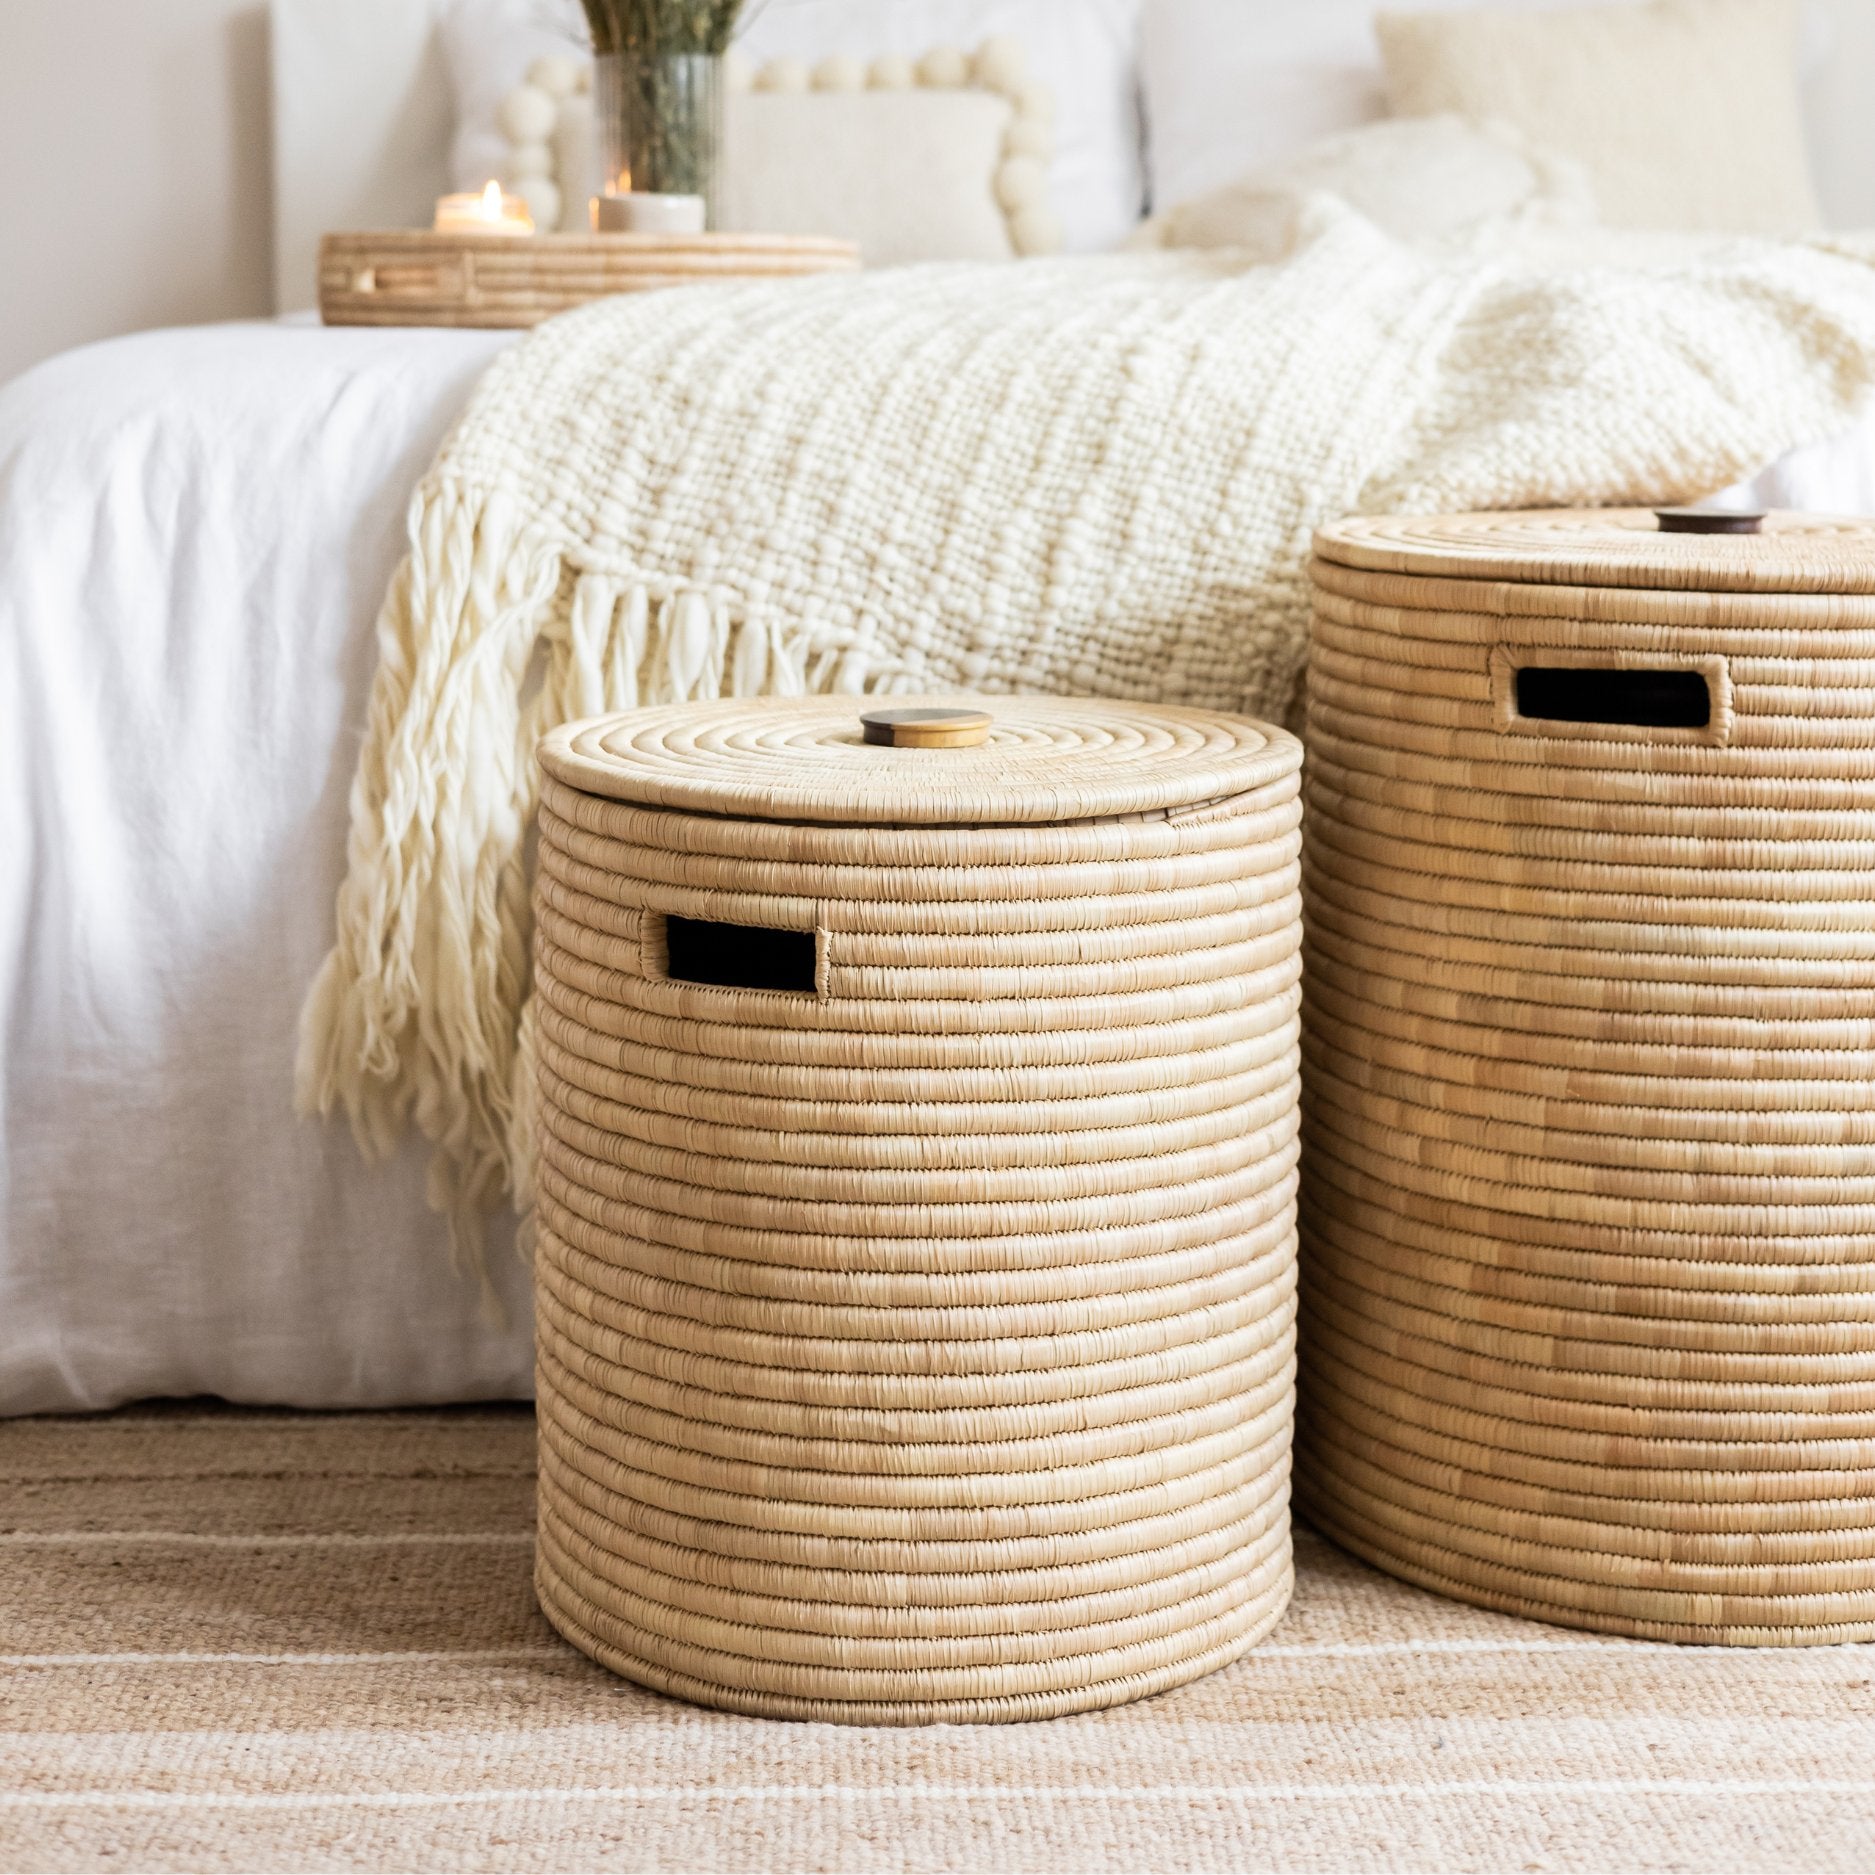 Woven wash baskets with lids - By Native